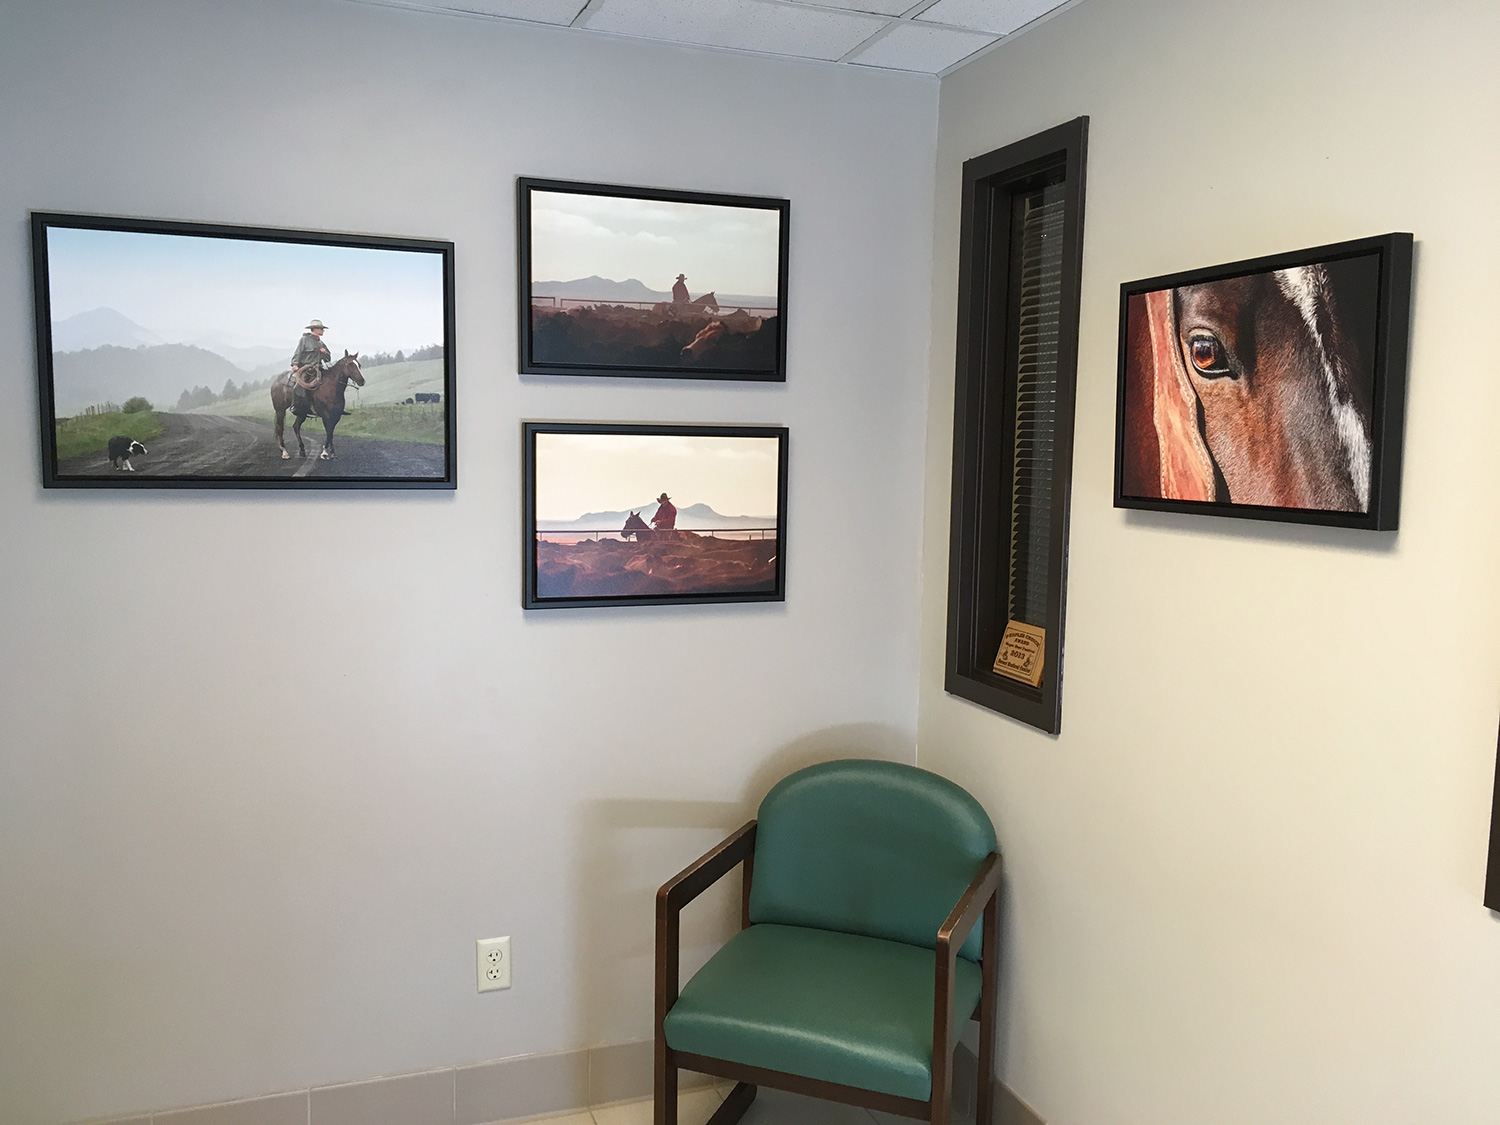 Photos on display at Sweet Medical Center in Chinook, Montana